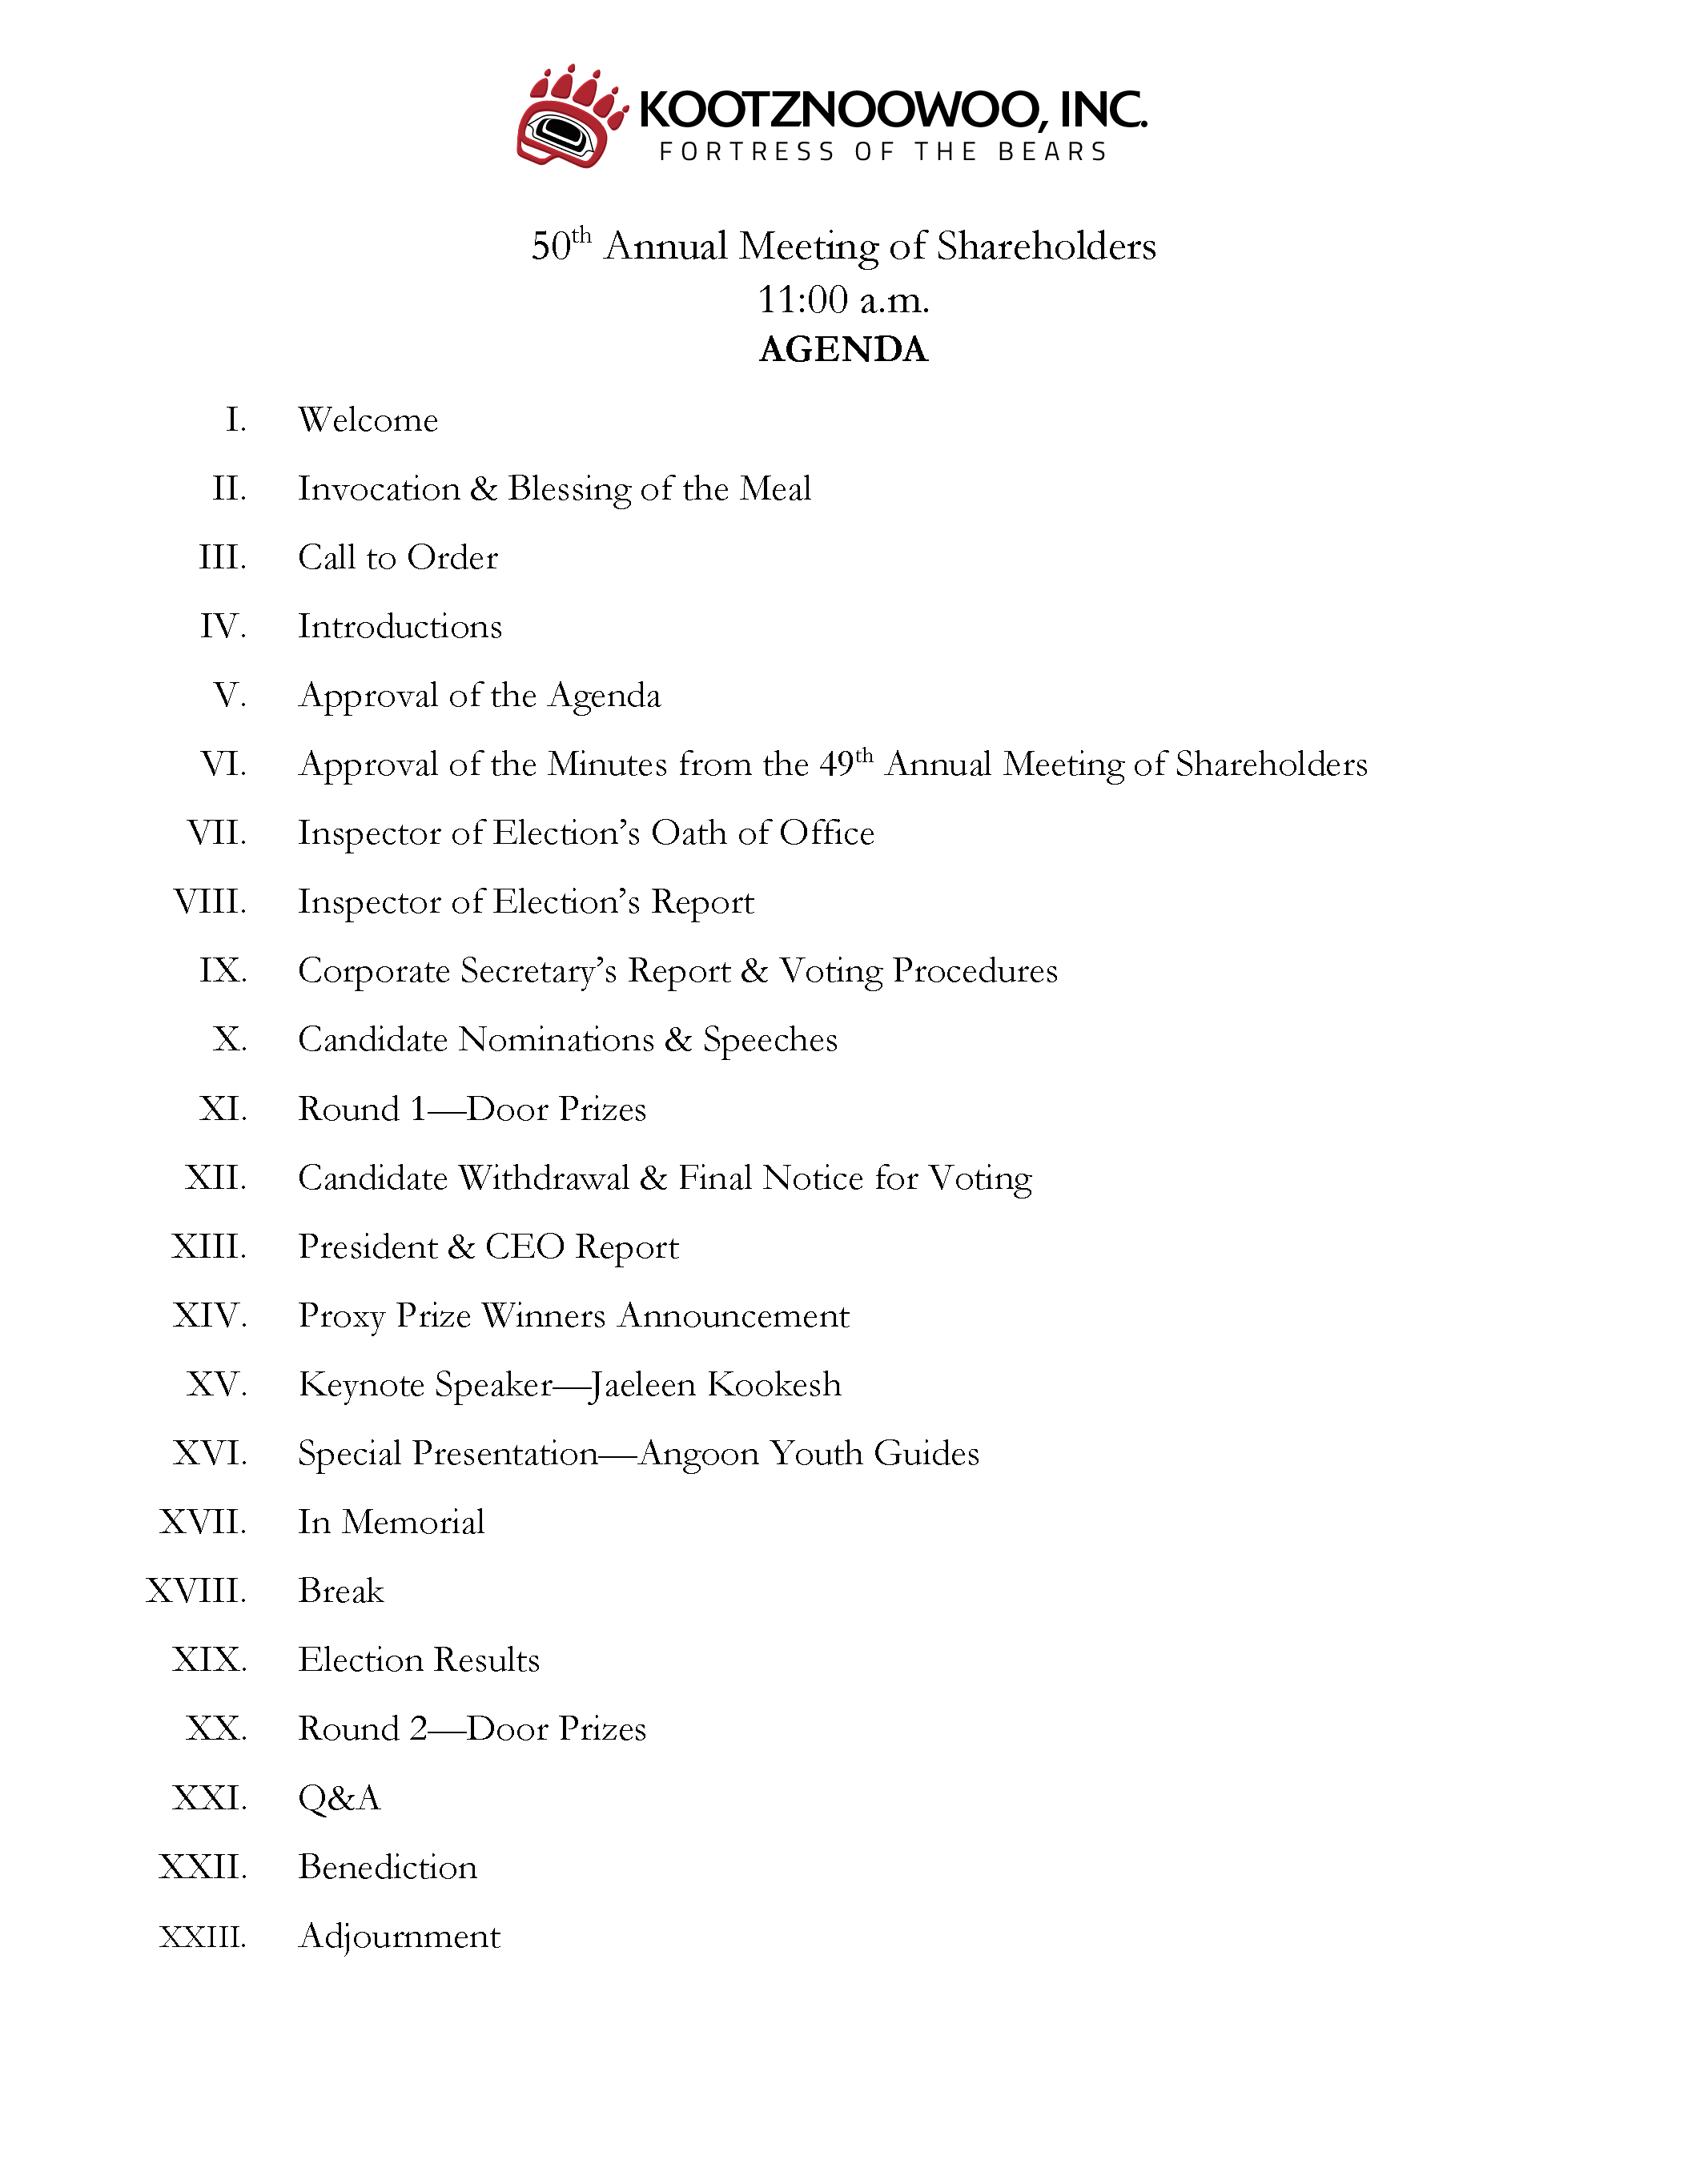 50th Annual Meeting of Shareholders Agenda.png